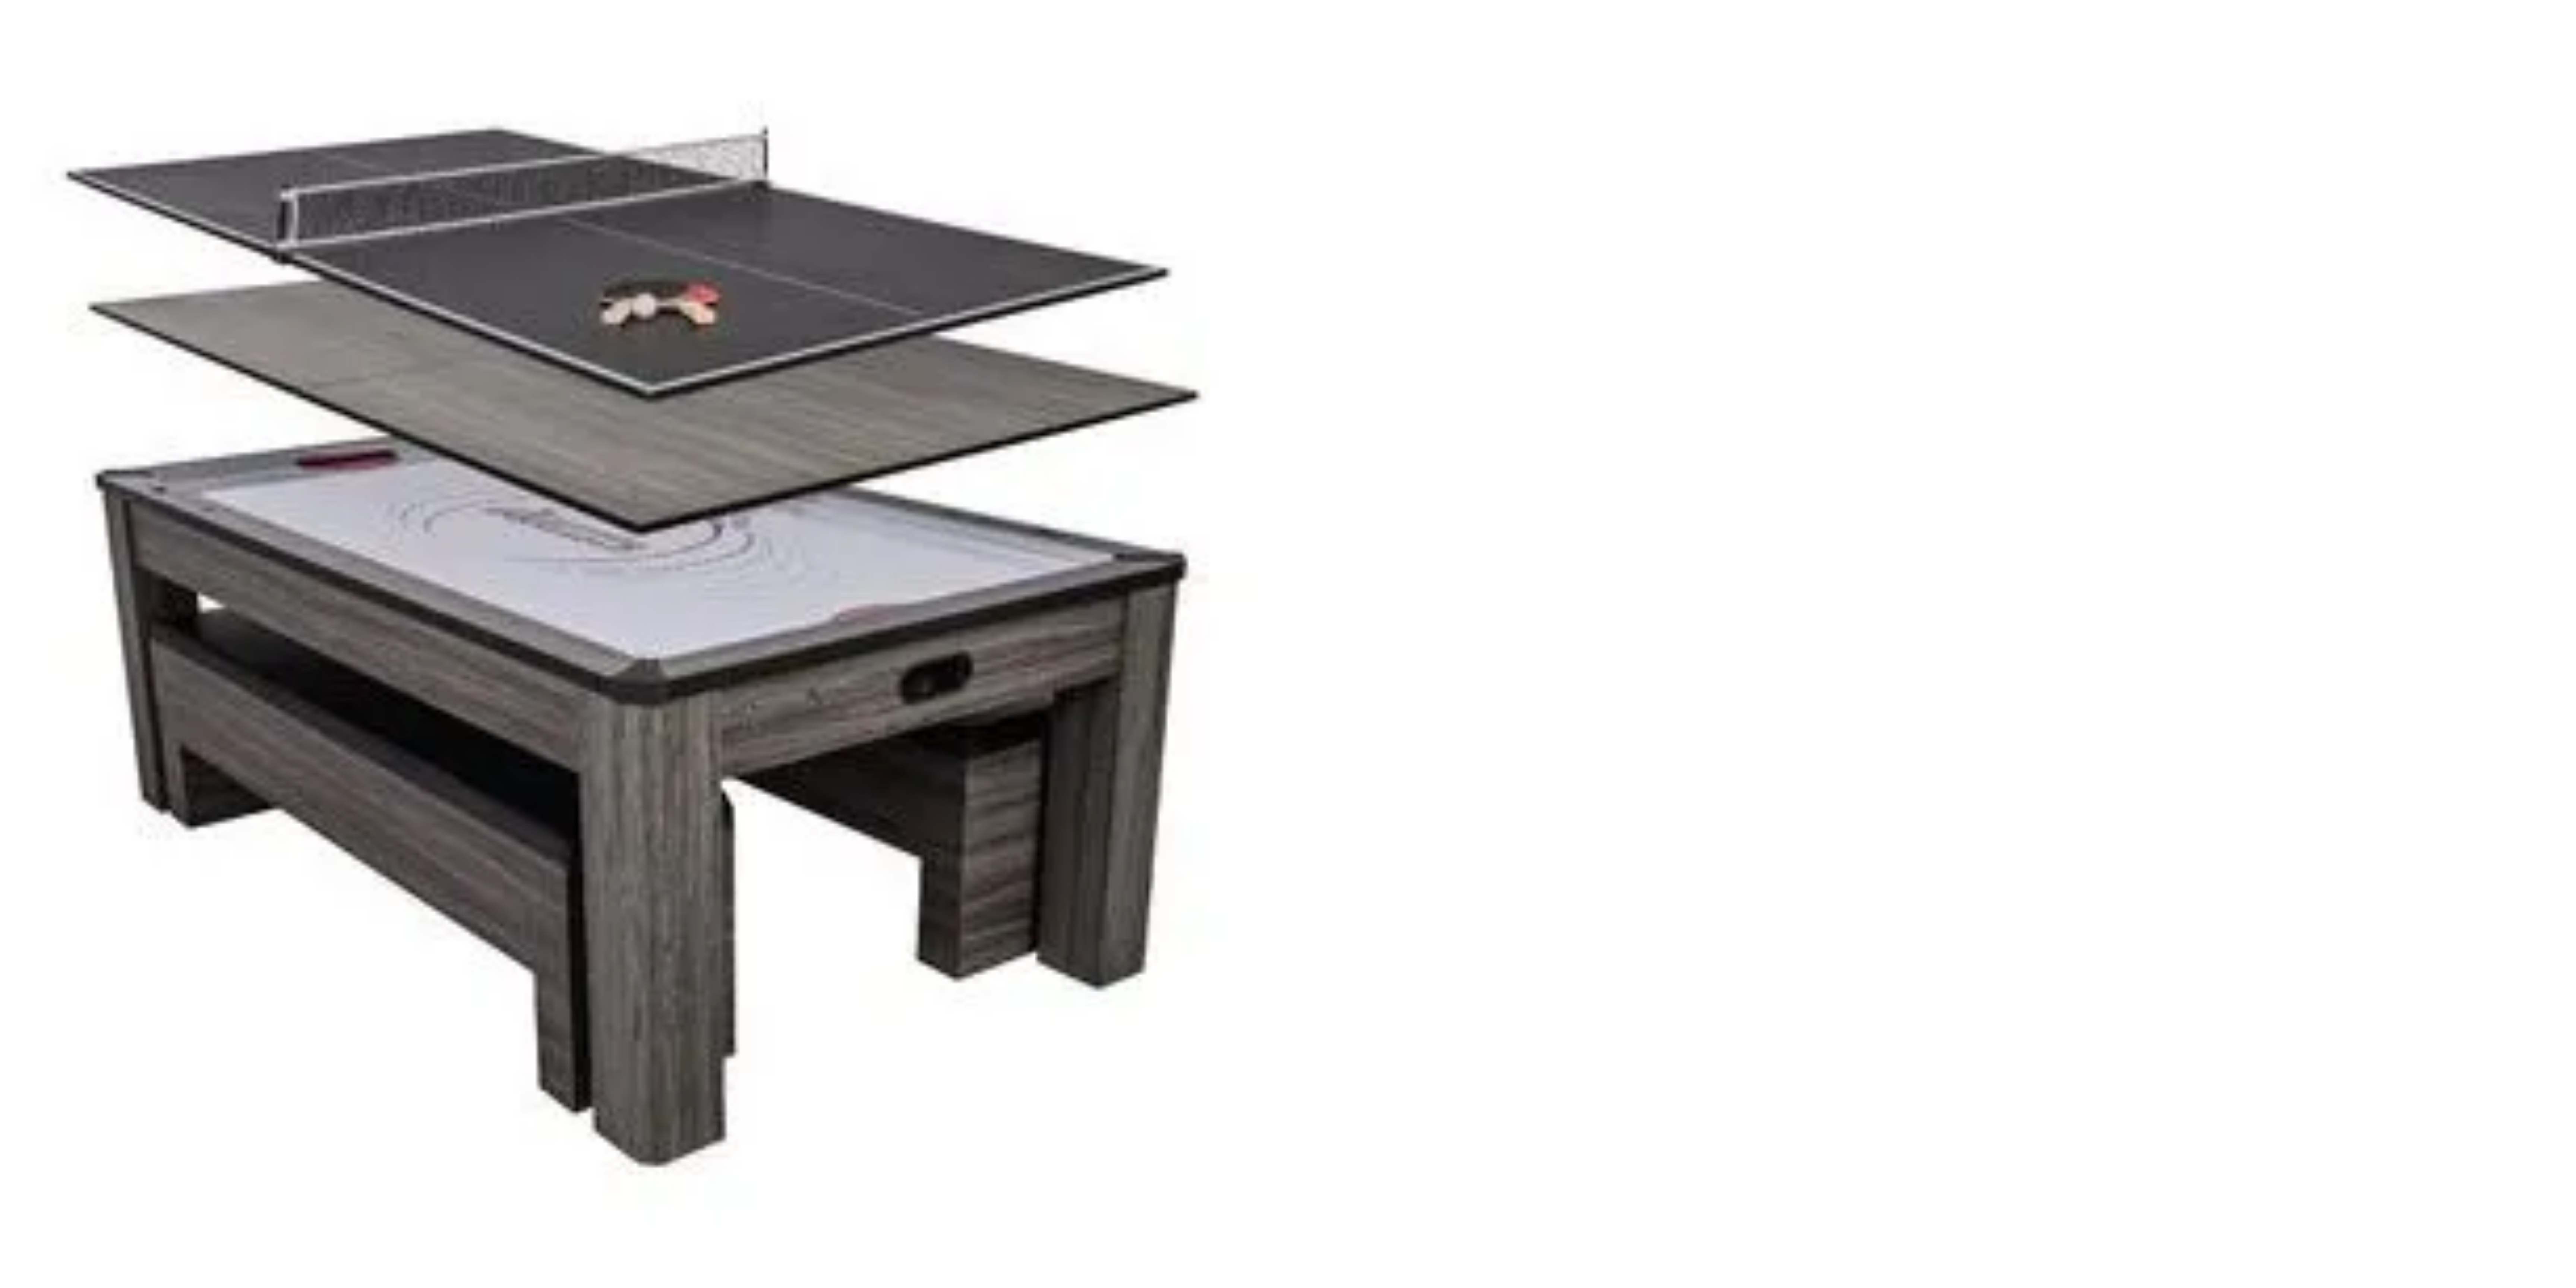 An air hockey table with sturdy construction, a dining table, table tennis and air hockey are included in the table.